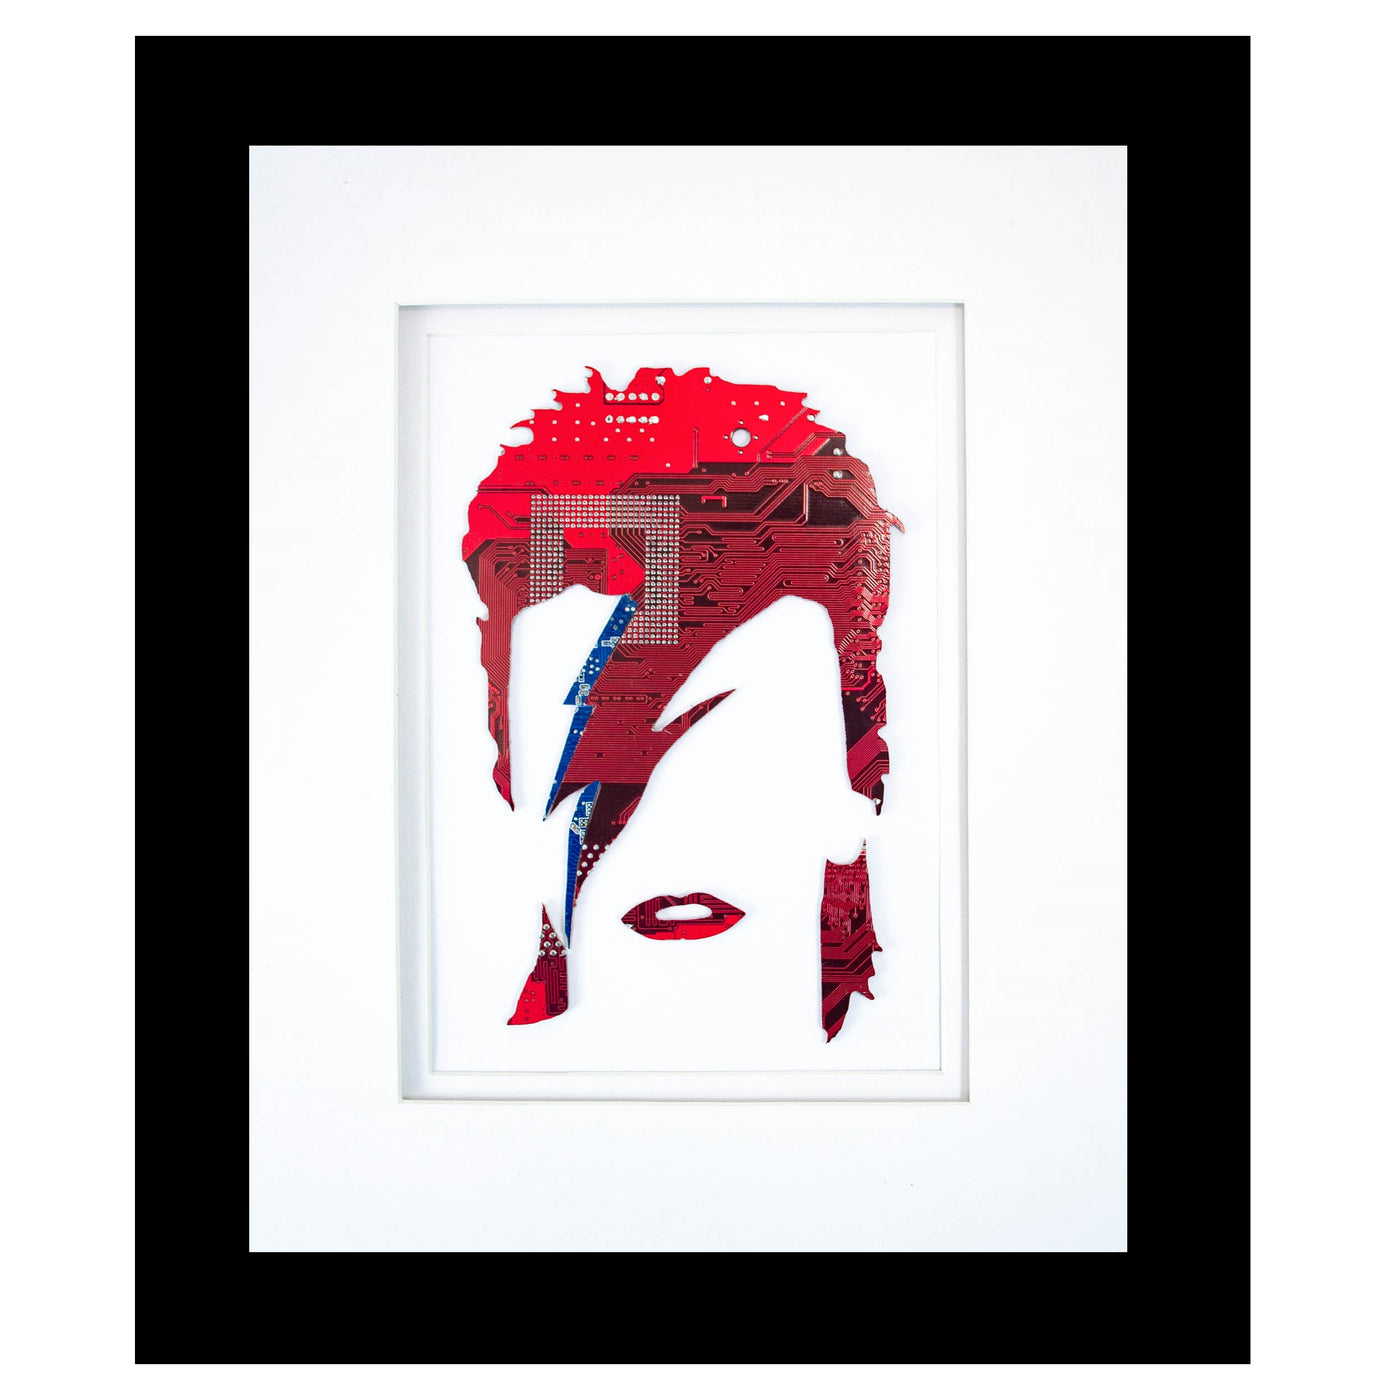 david bowie portrait made from recycled circuit boards and framed in a black frame